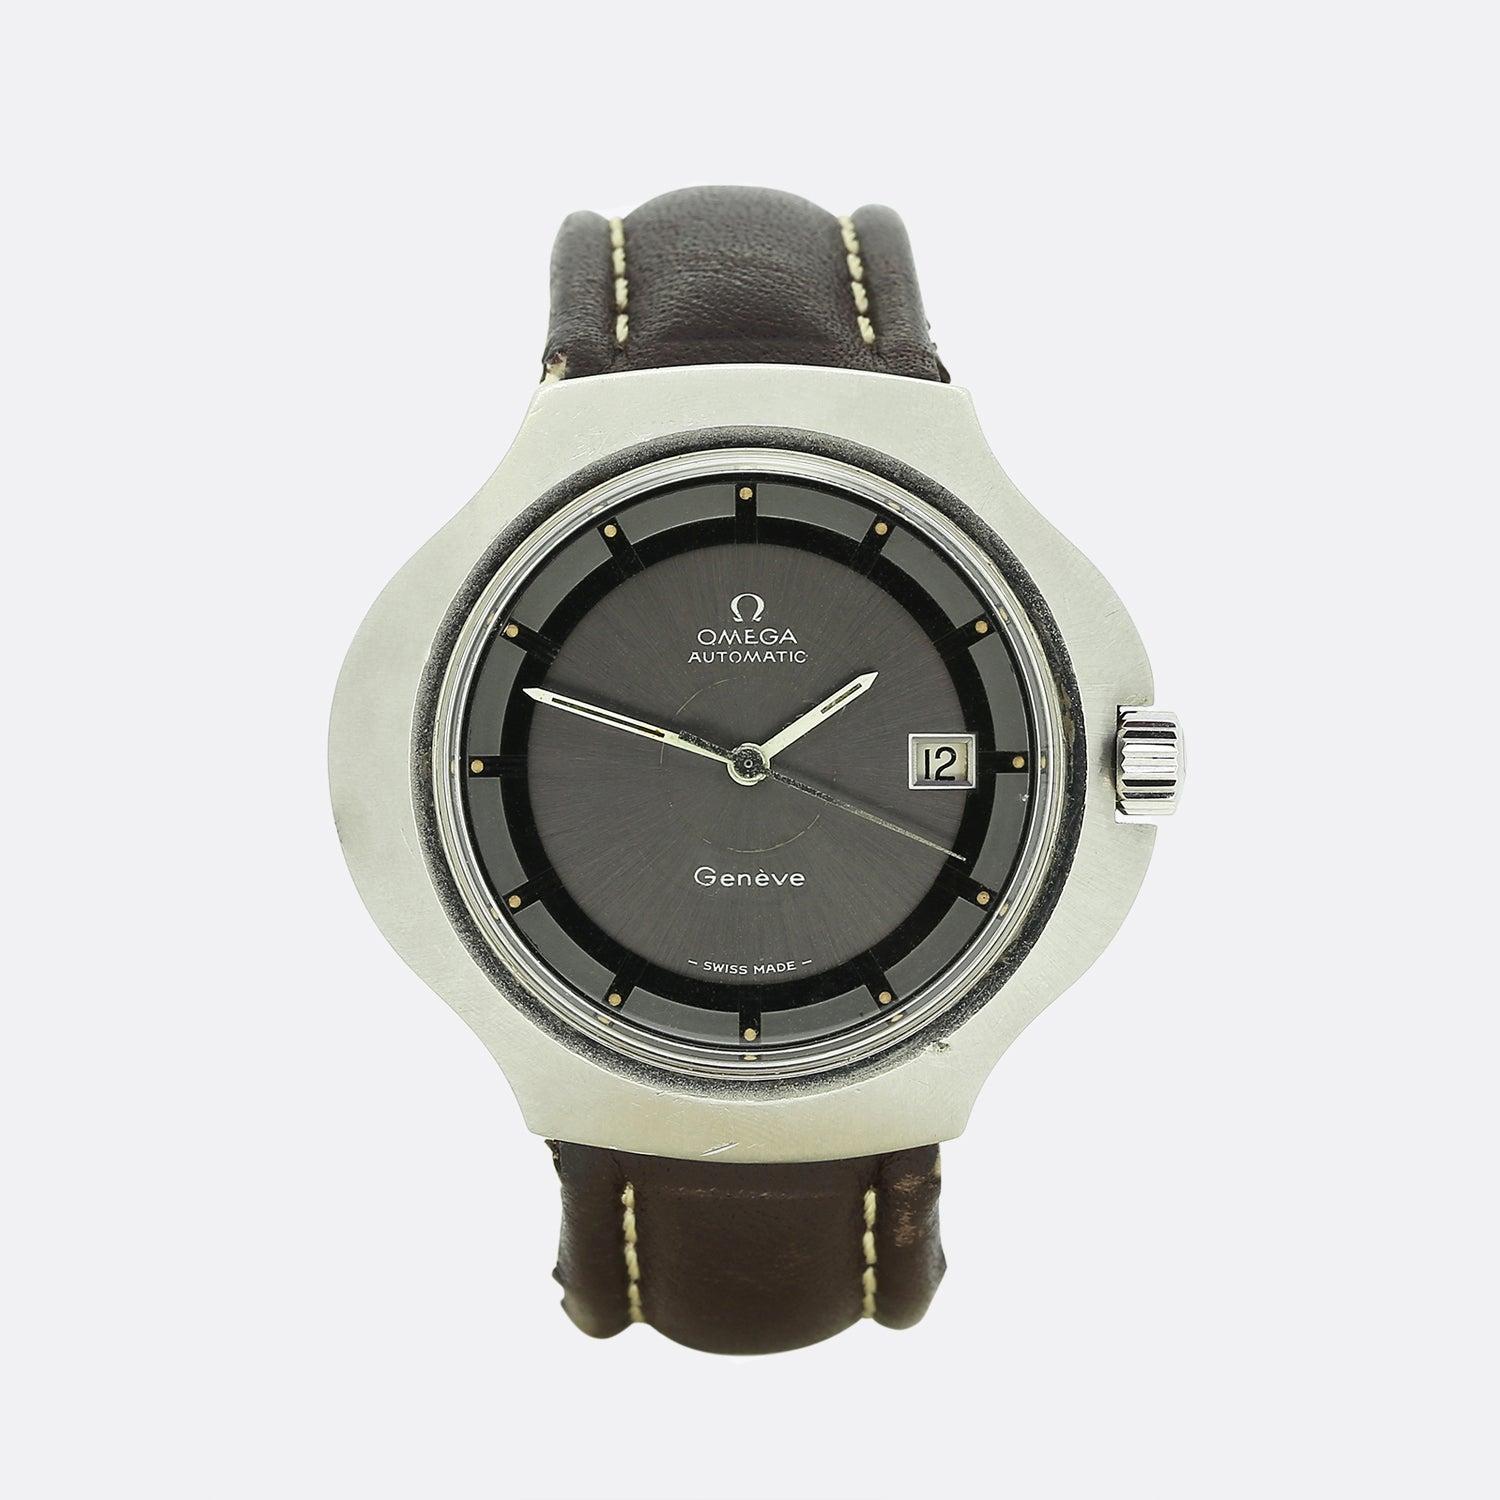 This a gents stainless steel Omega wristwatch.  Showcasing a silver-tone stainless steel case with a replacement brown leather strap, this automatic timepiece possesses the unique quality of an oval shaped bezel with a round shaped dial. The piece